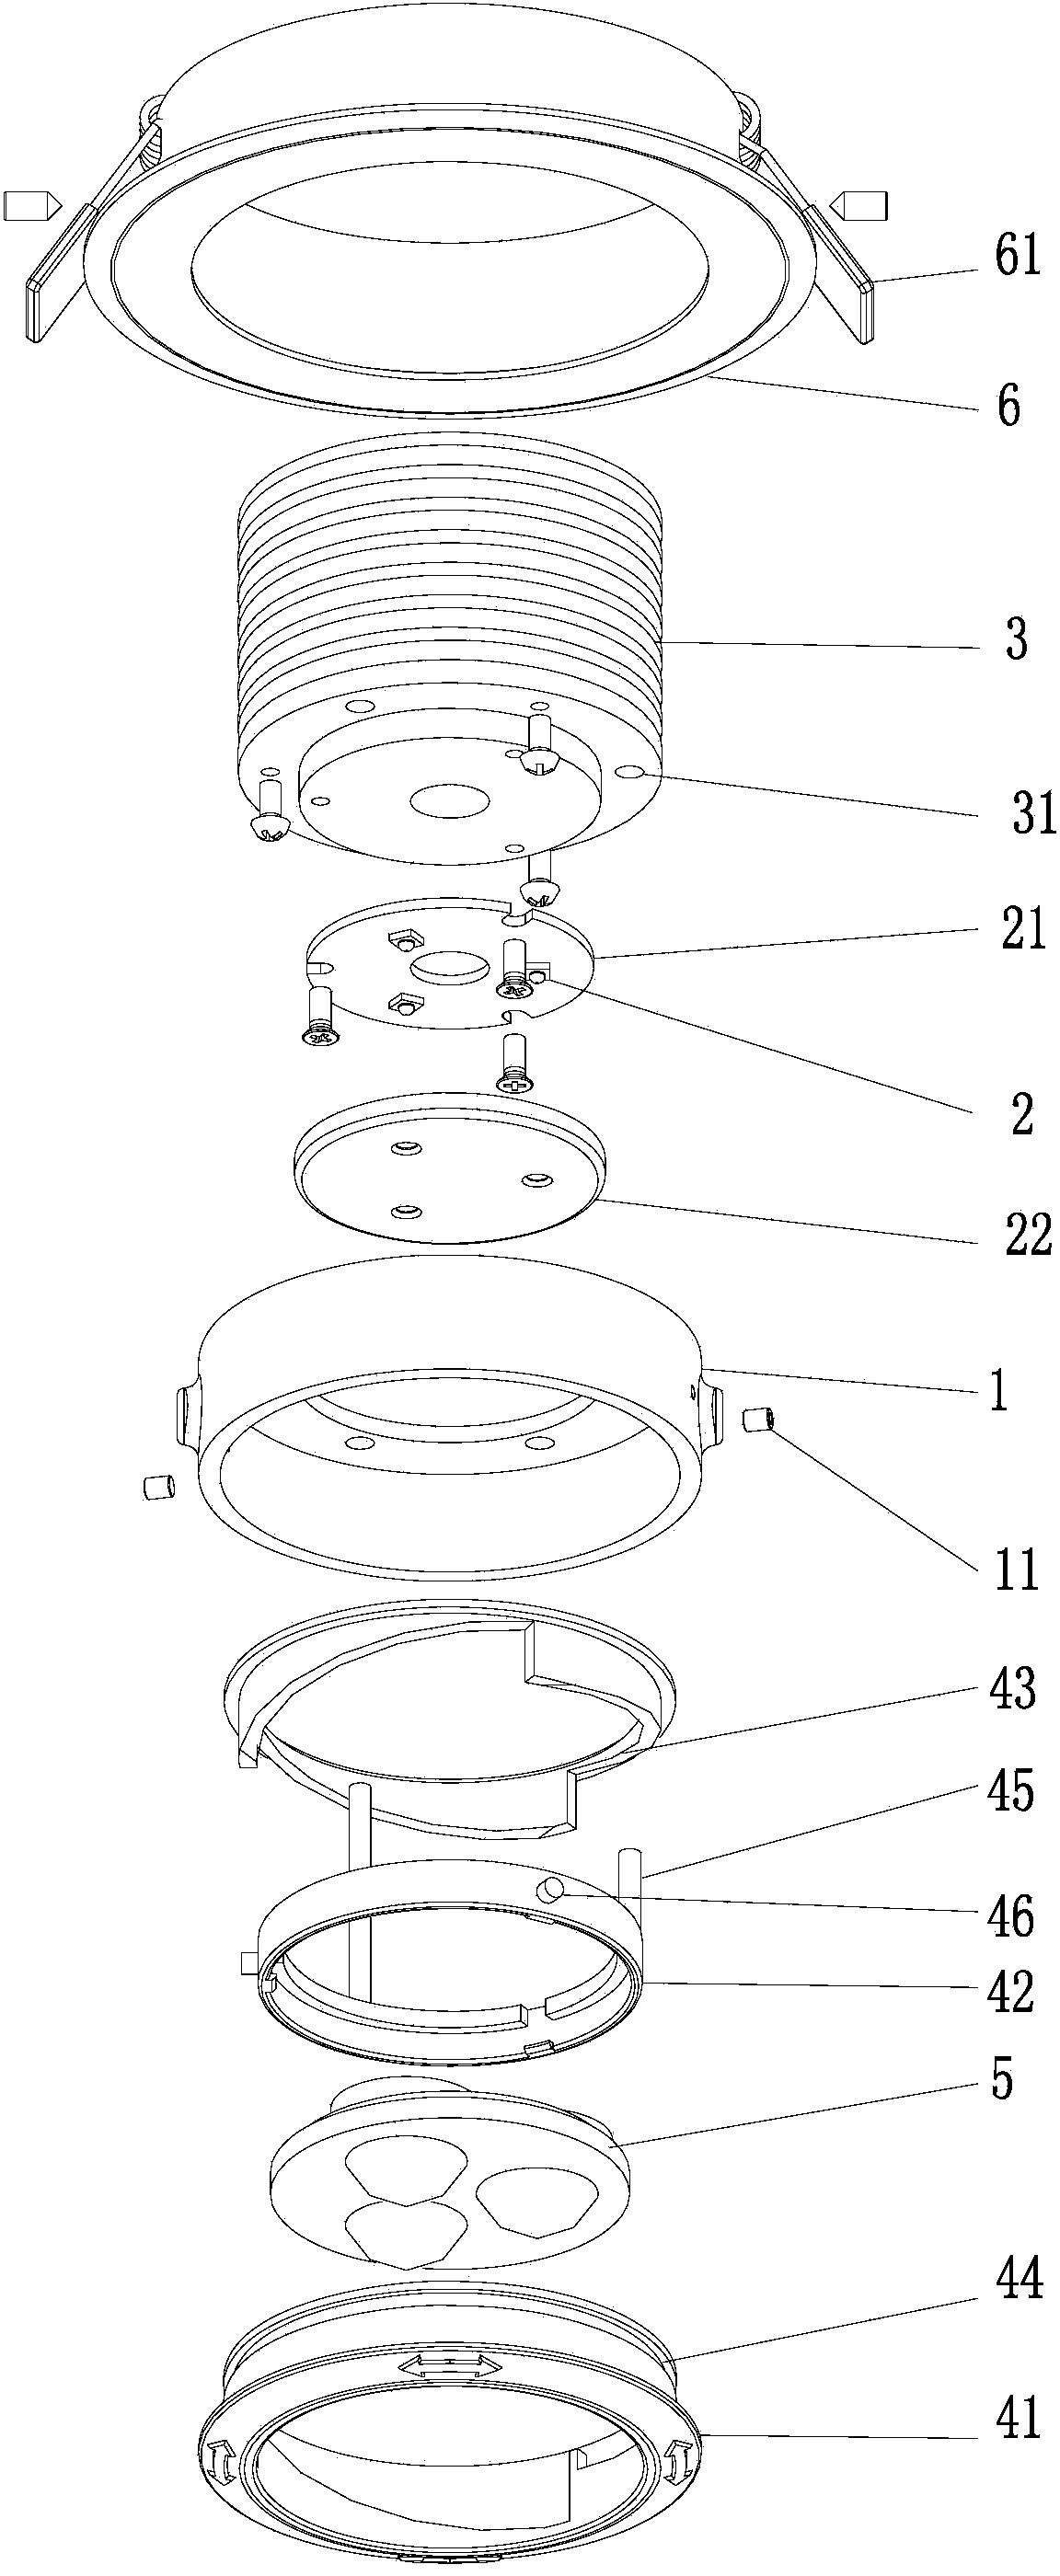 Double-circle rotary focusing ceiling lamp capable of being limited by check ring